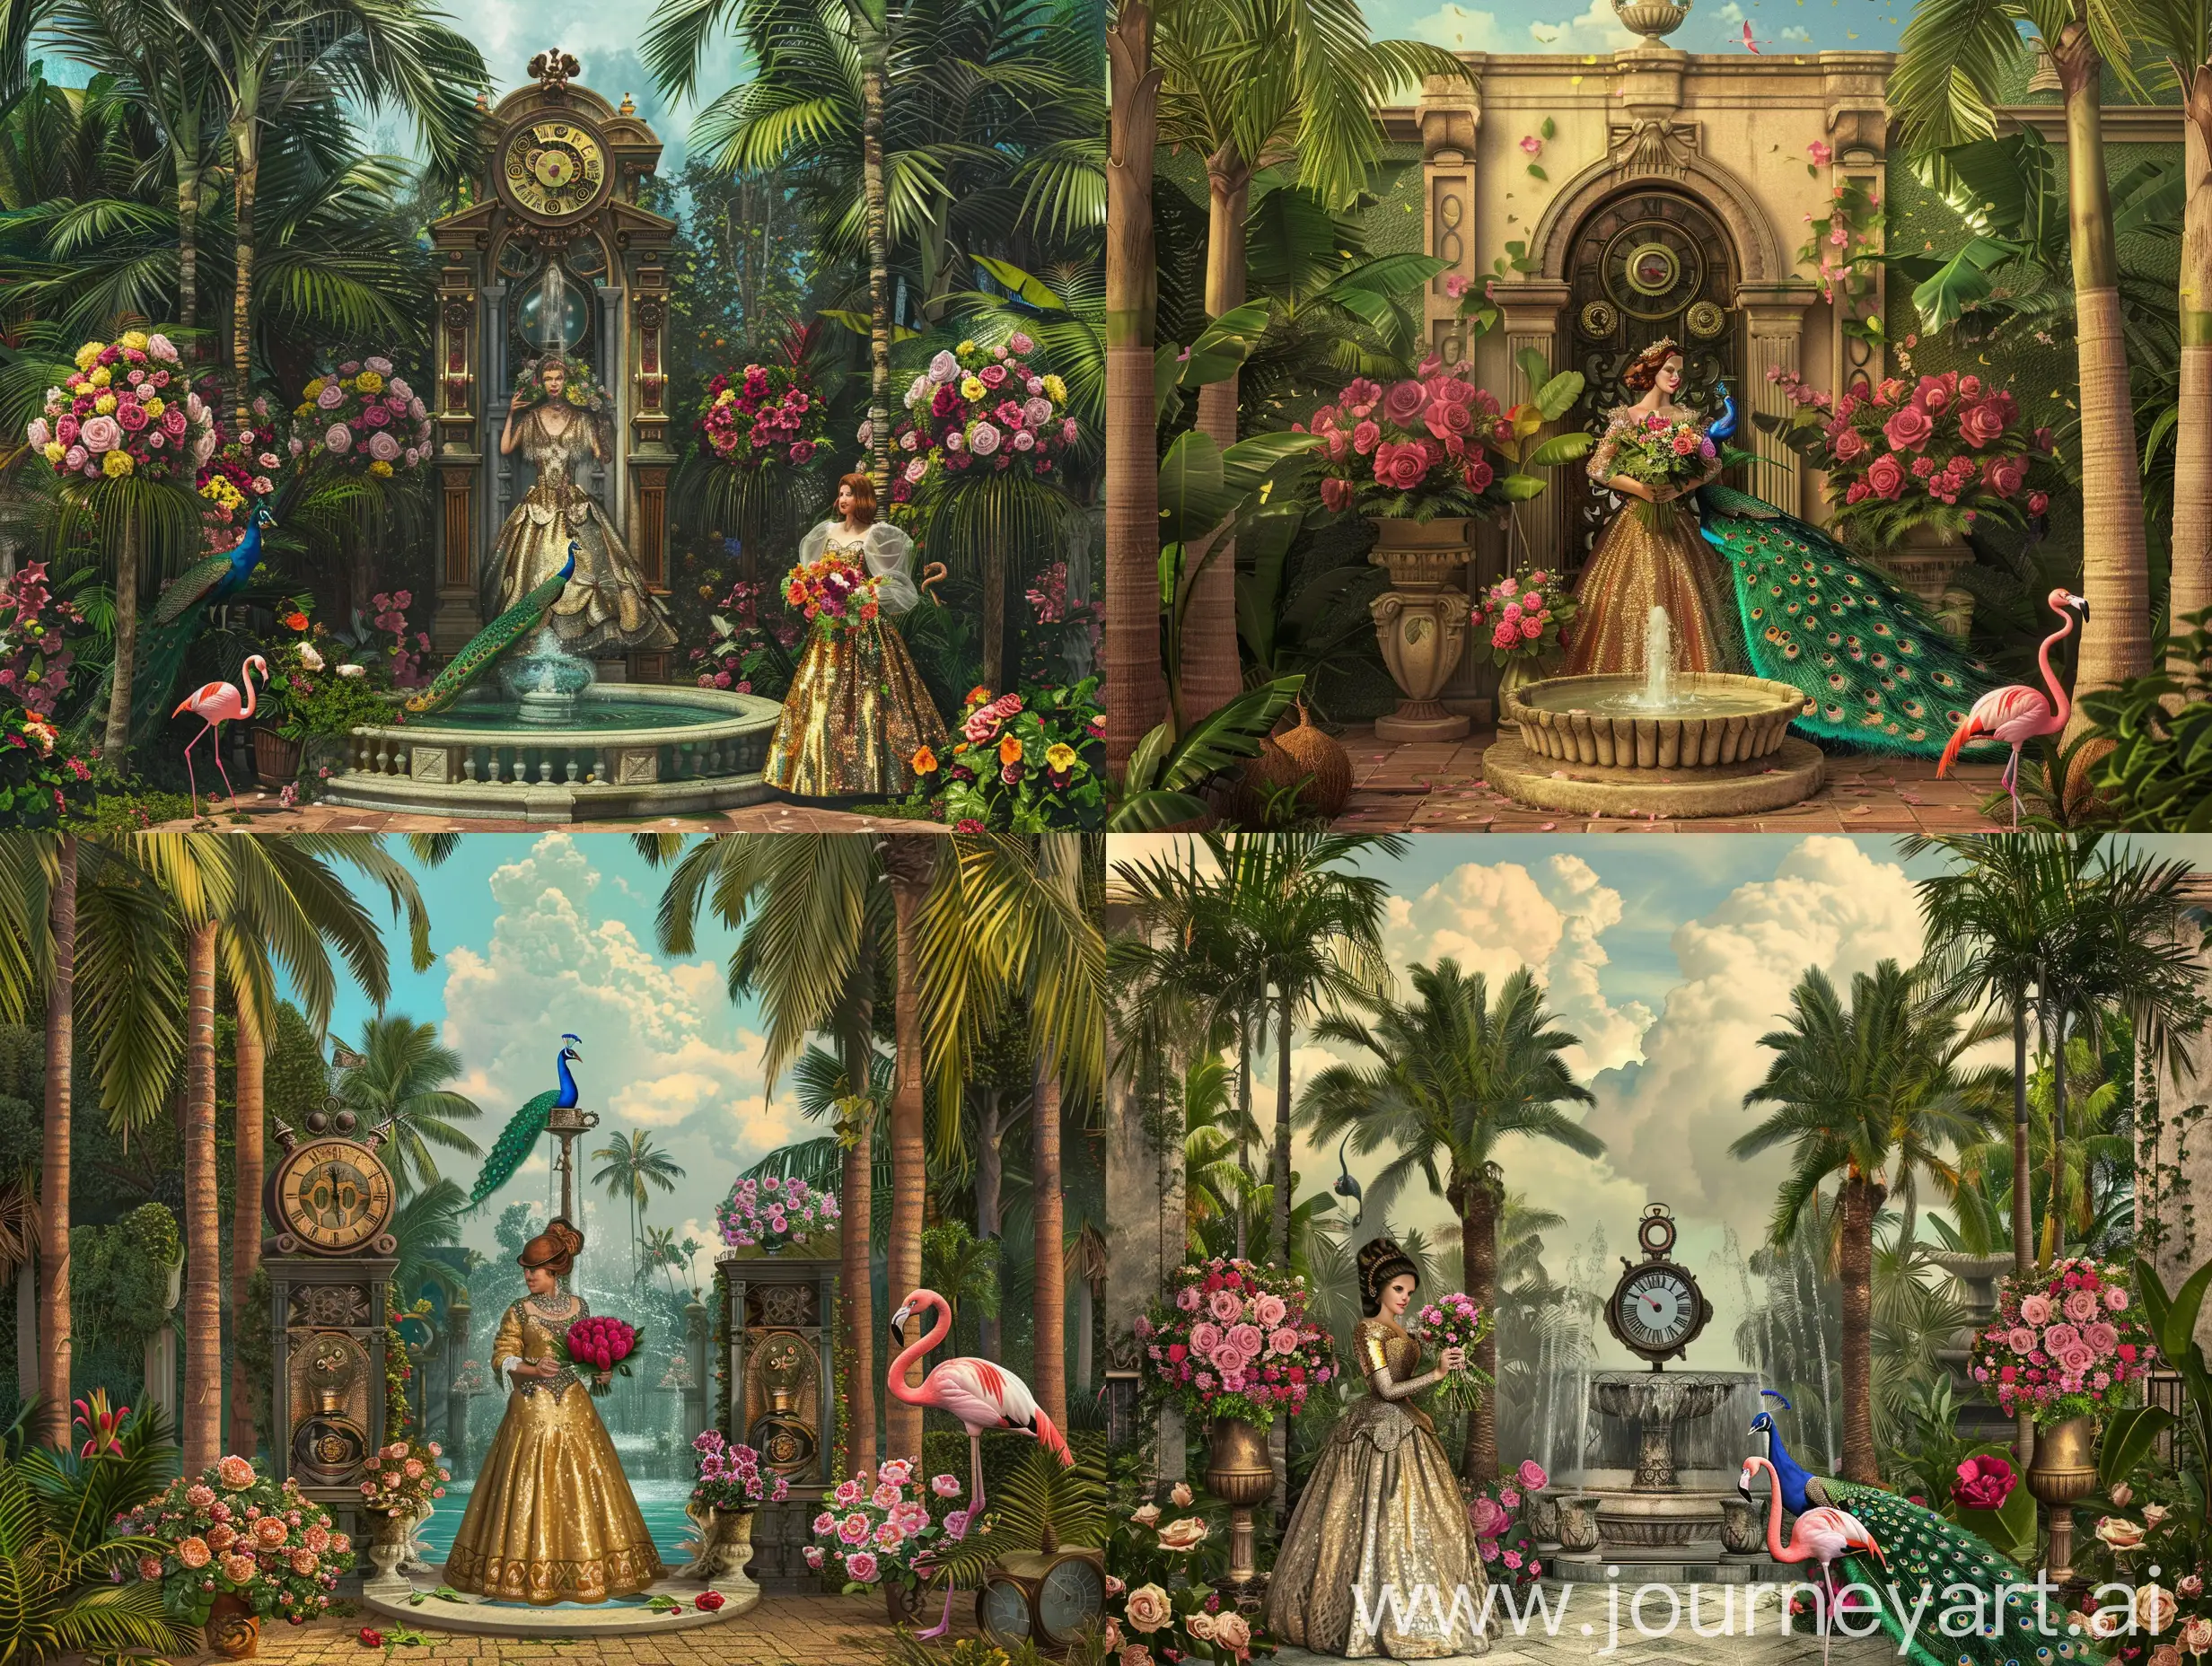 Realistic Tropical lush Victorian Flower Garden with a Victorian Woman in a beautiful shiny Victorian ball gown holding a bouquet of flowers. Tall coconut trees both sides. A small Water fountain with a peacock in the fountain. A  big vase of roses. A big Steampunk Clock. A pink flamingo.